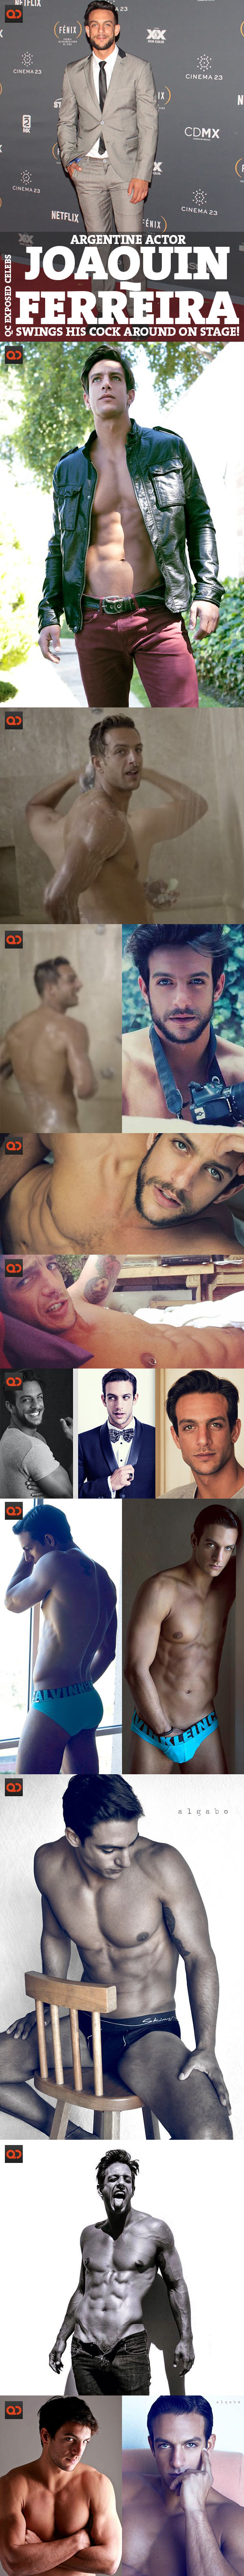 qc-exposed-celebs-joaquin_ferreira-mexican_actor-naked_swings_his_cock_around_on_stage-collage01